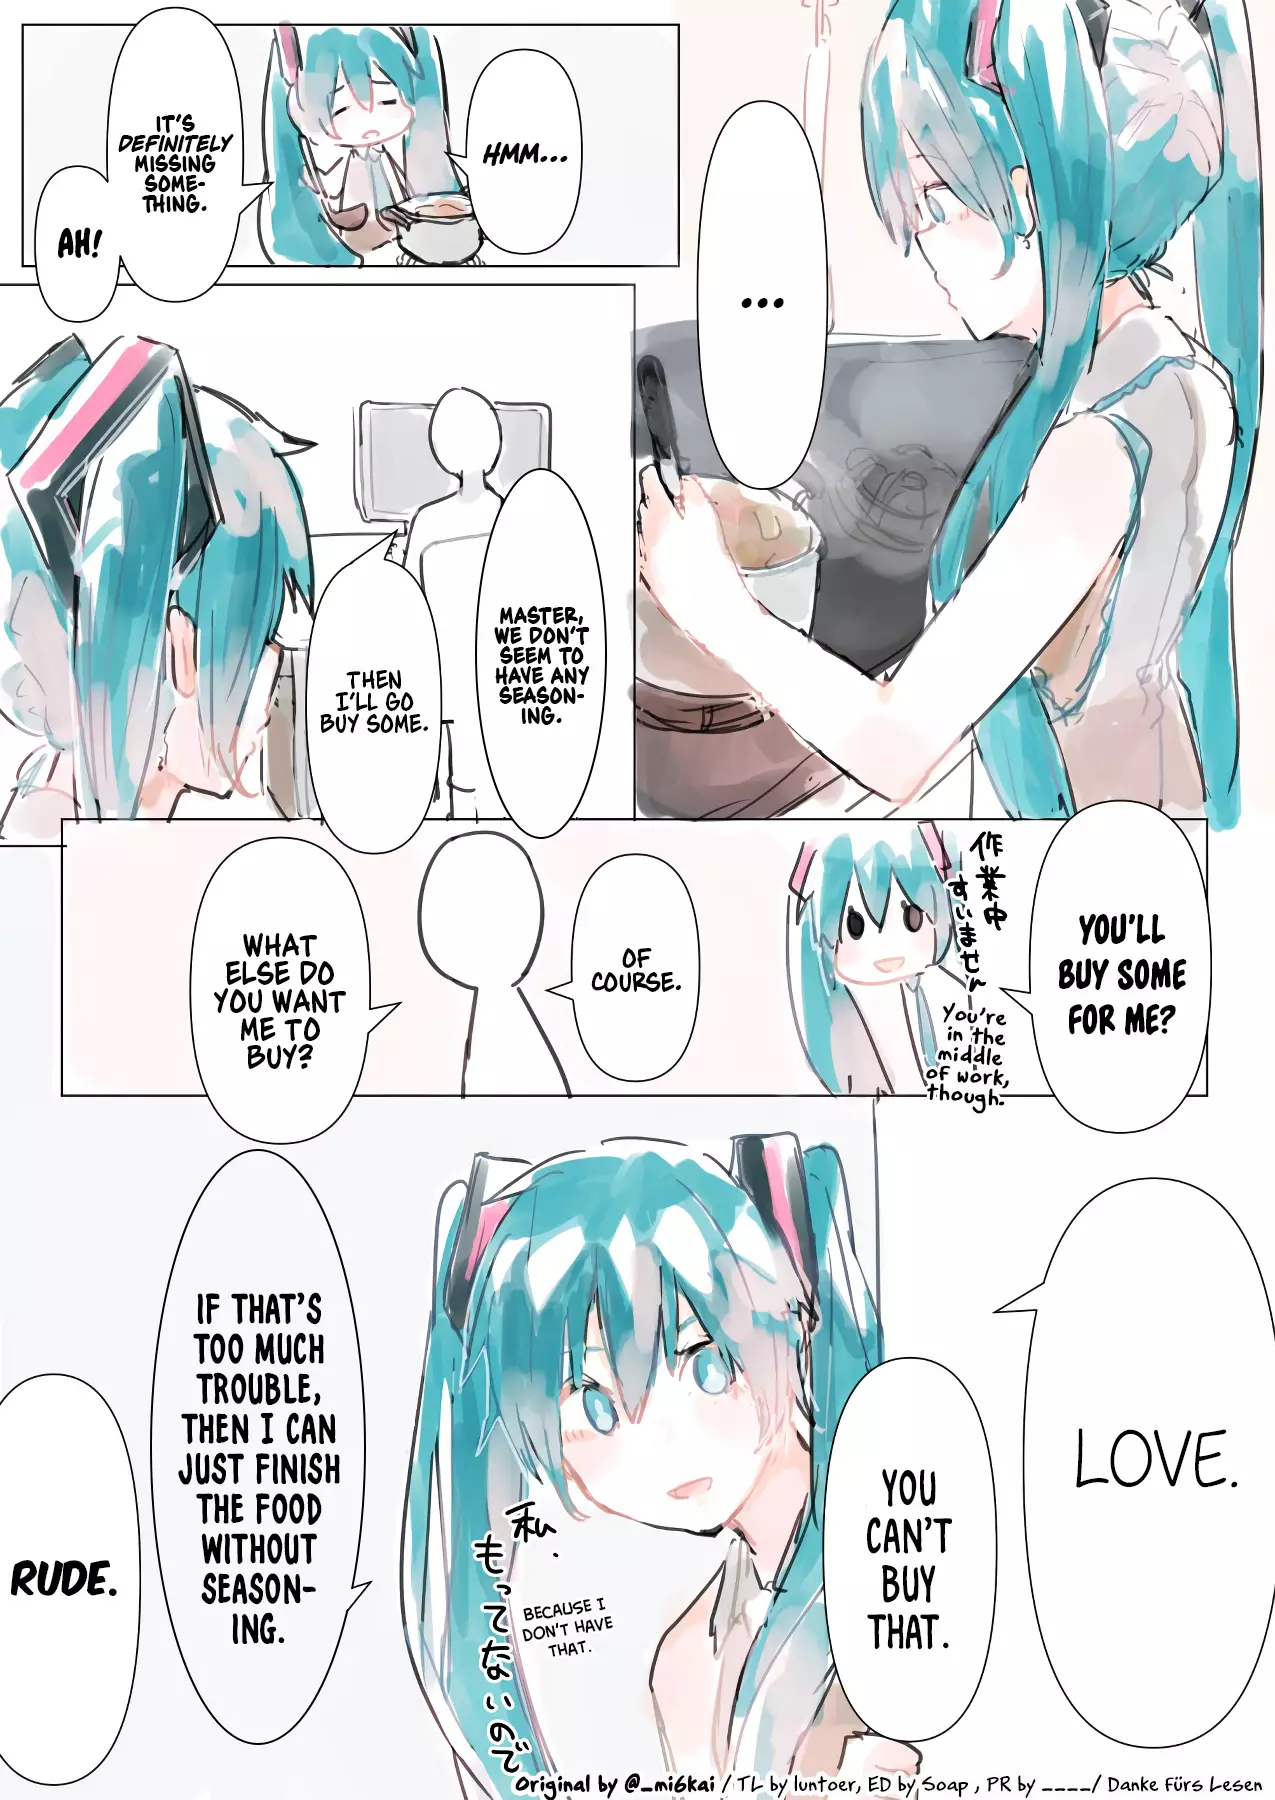 The Daily Life Of Master & Hatsune Miku - 14 page 1-4a0fab87